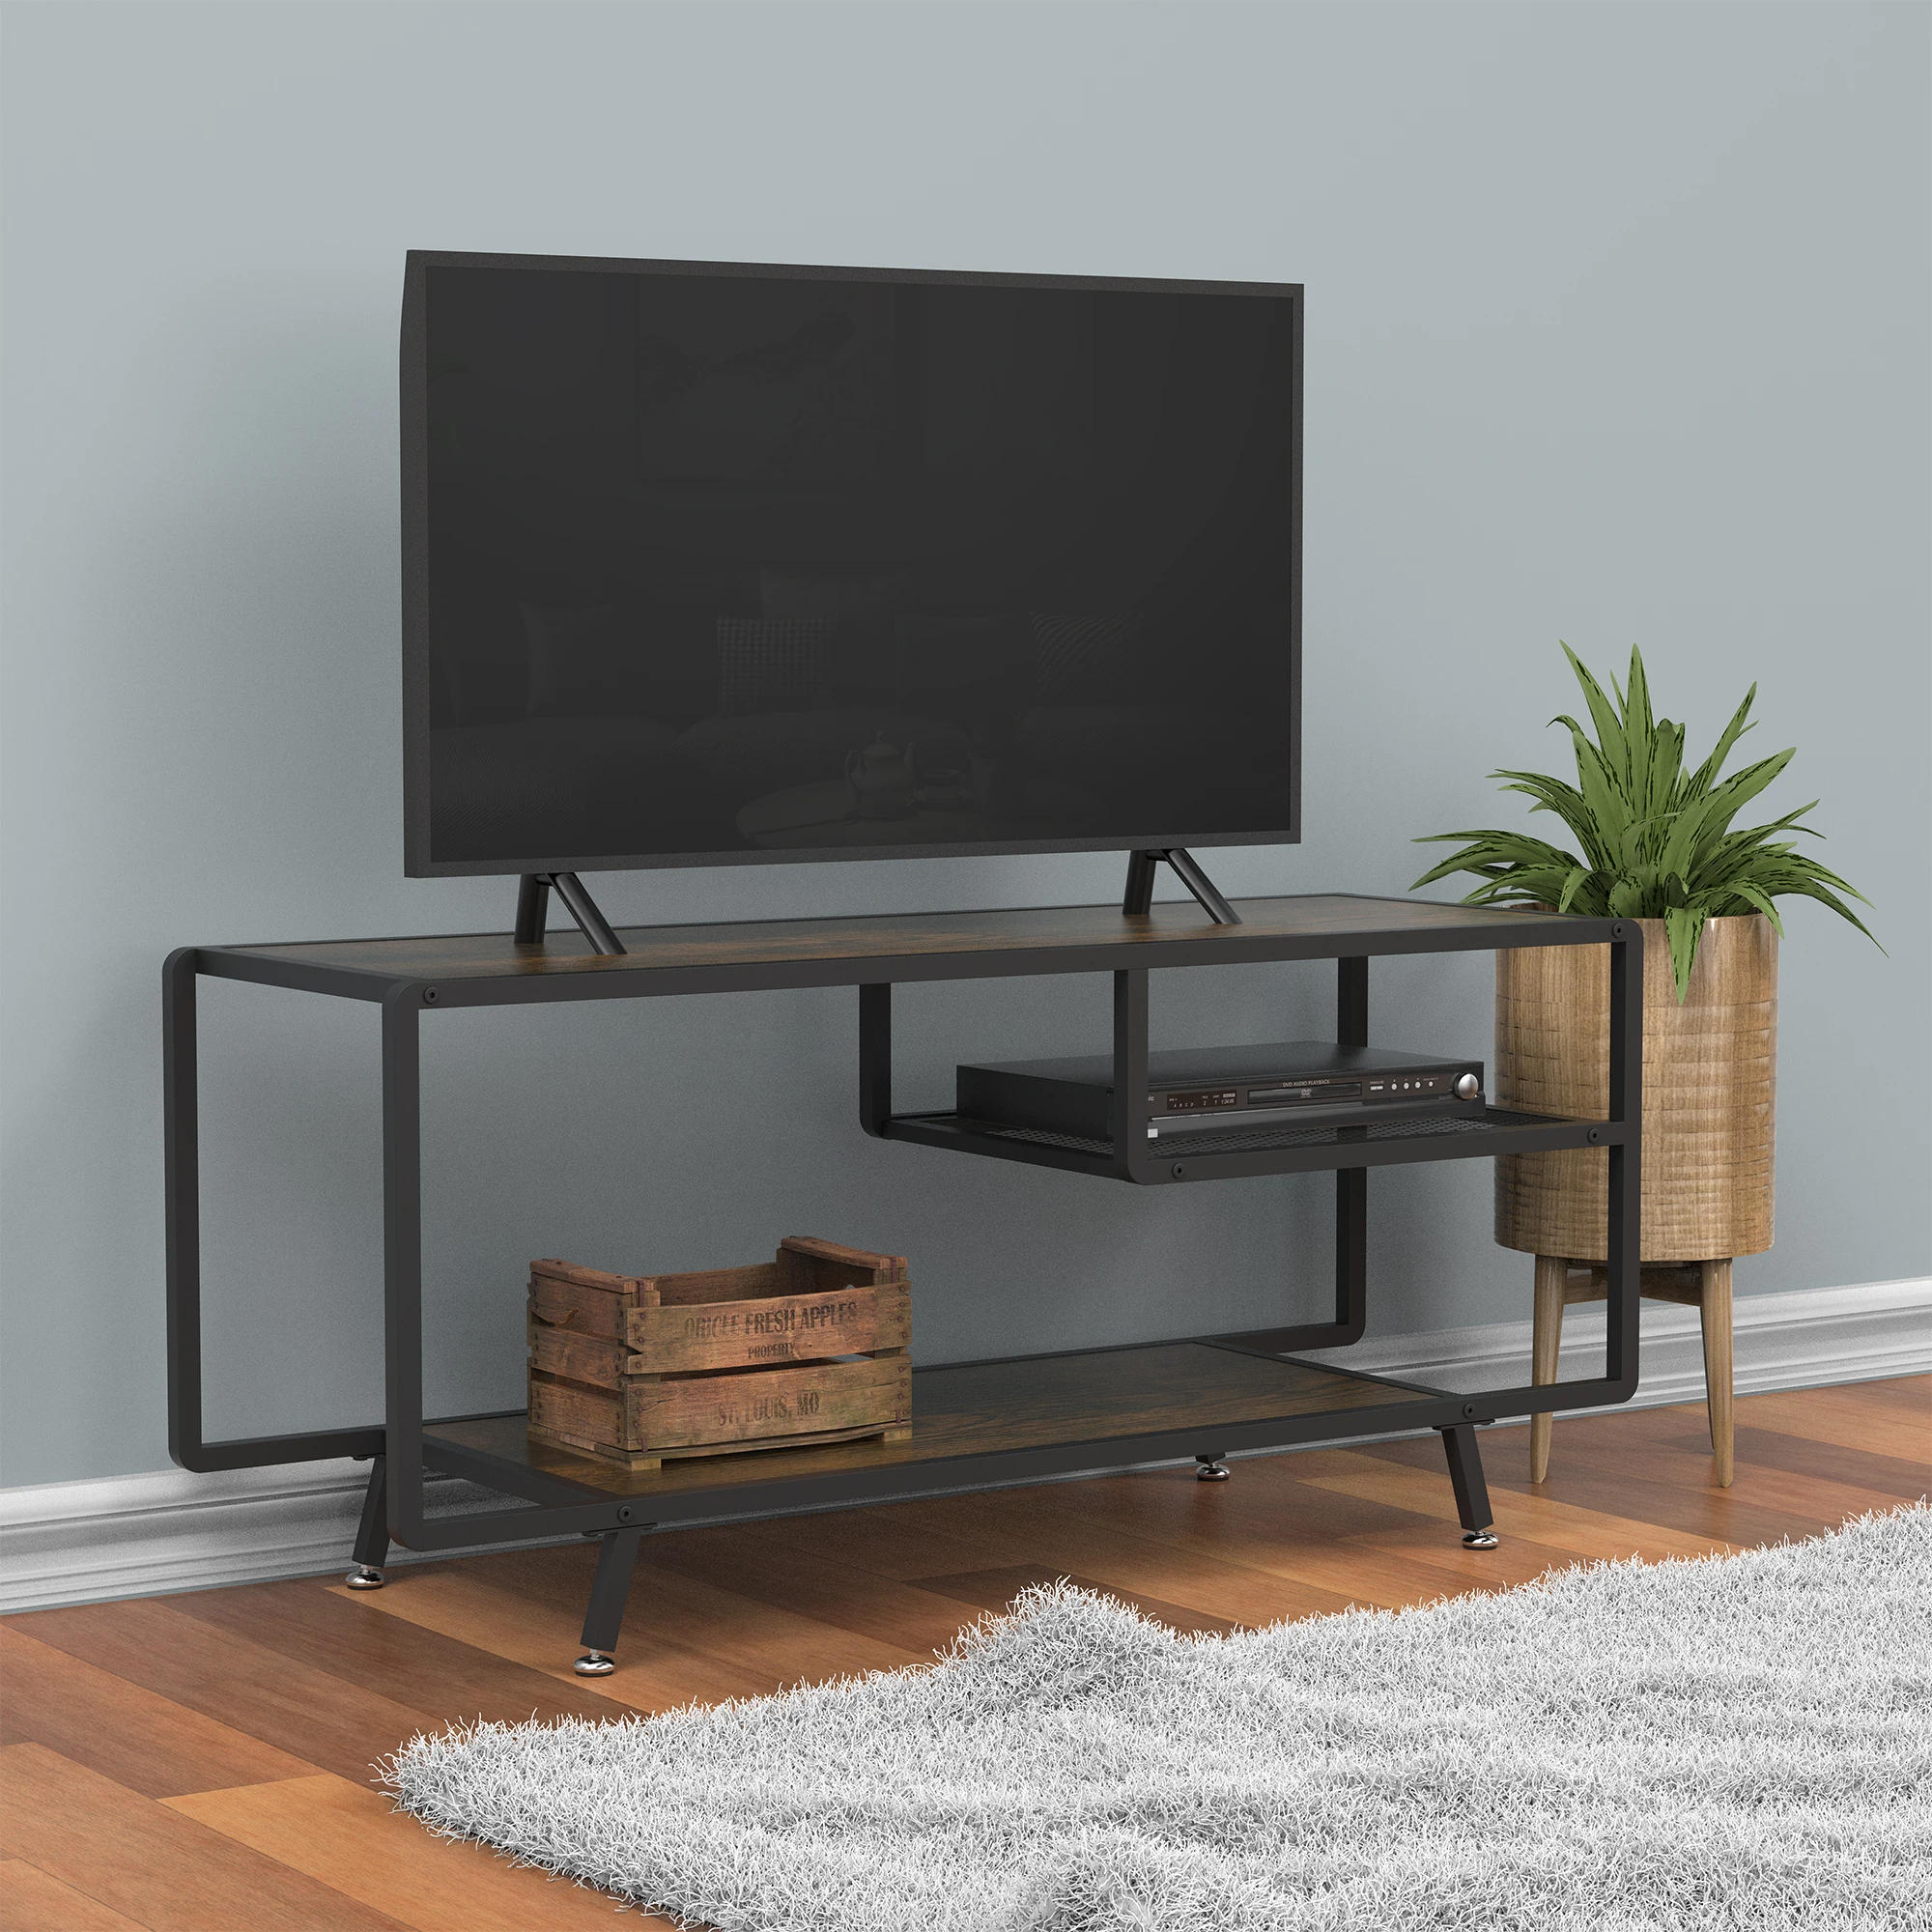 

47In Modern TV Stand for Home Entertainment Center Media Console Table W/Open Shelving Storage Wood Retro Industrial TV Cabinet